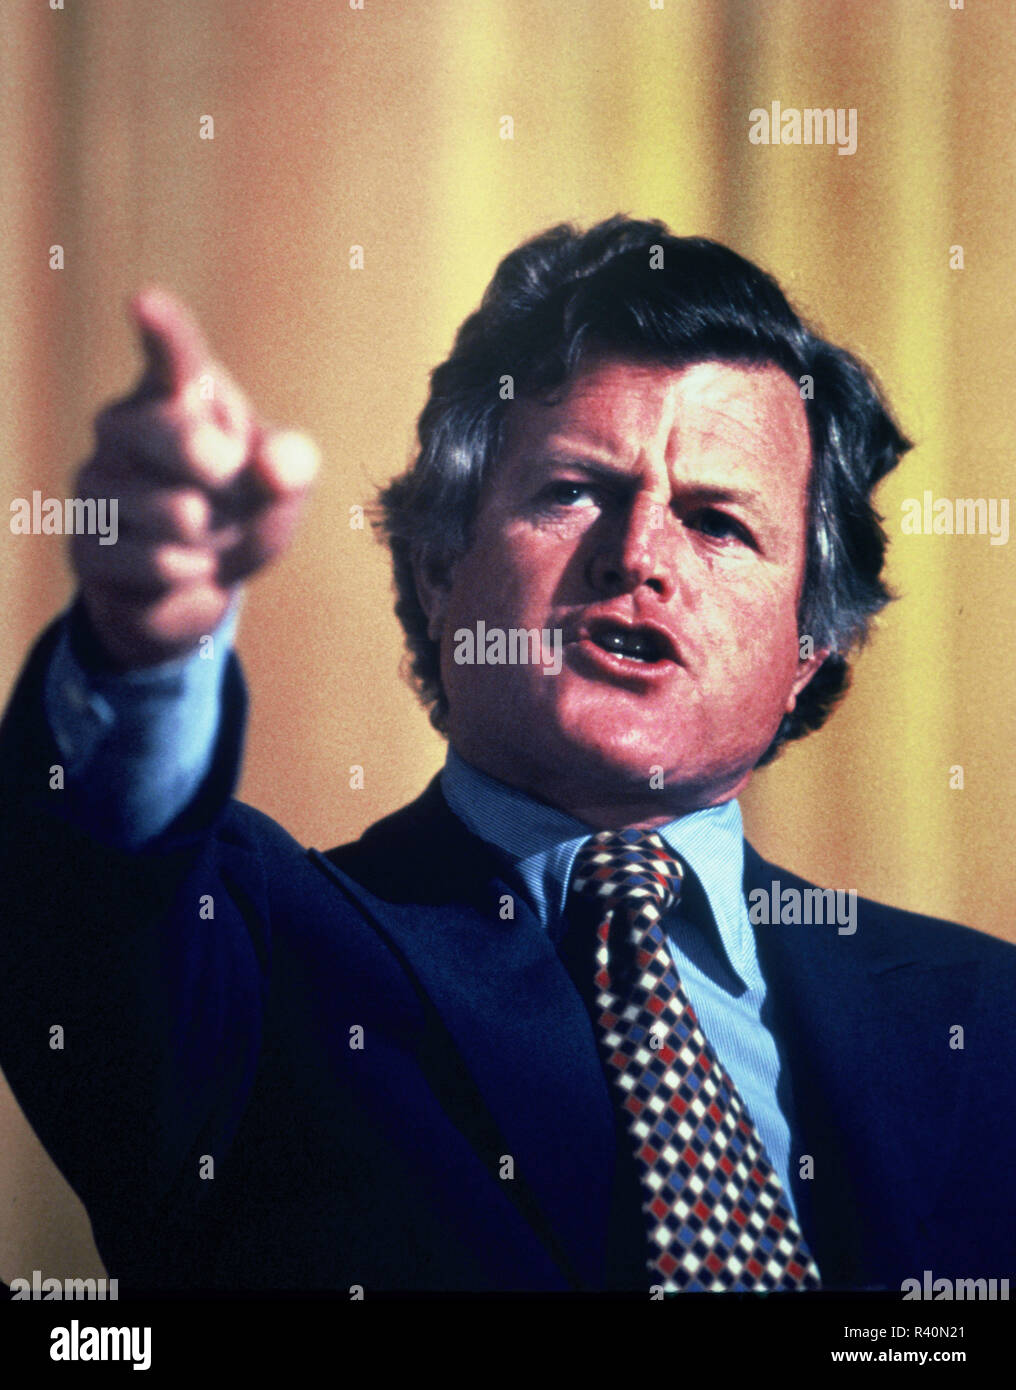 December 9, 1978: Senator Ted Kennedy 1978 speaks at a Democratic Party Mid-Term Conference in Memphis, Tennessee. Stock Photo